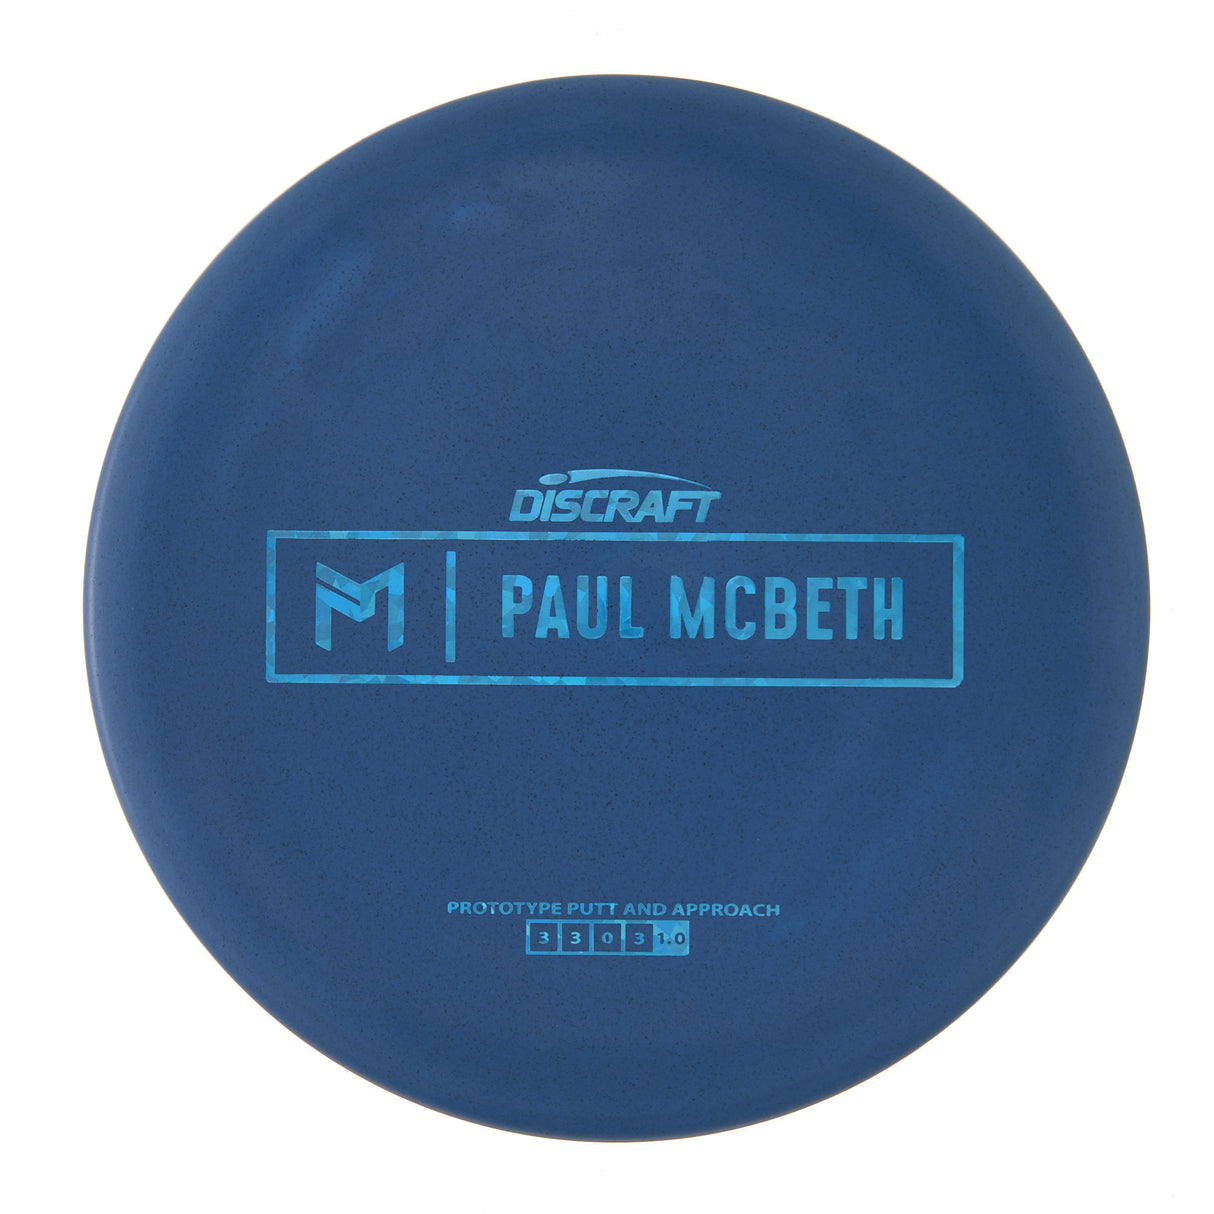 Discraft Kratos - Mcbeth Prototype Special Rubber Blend 174g | Style 0006